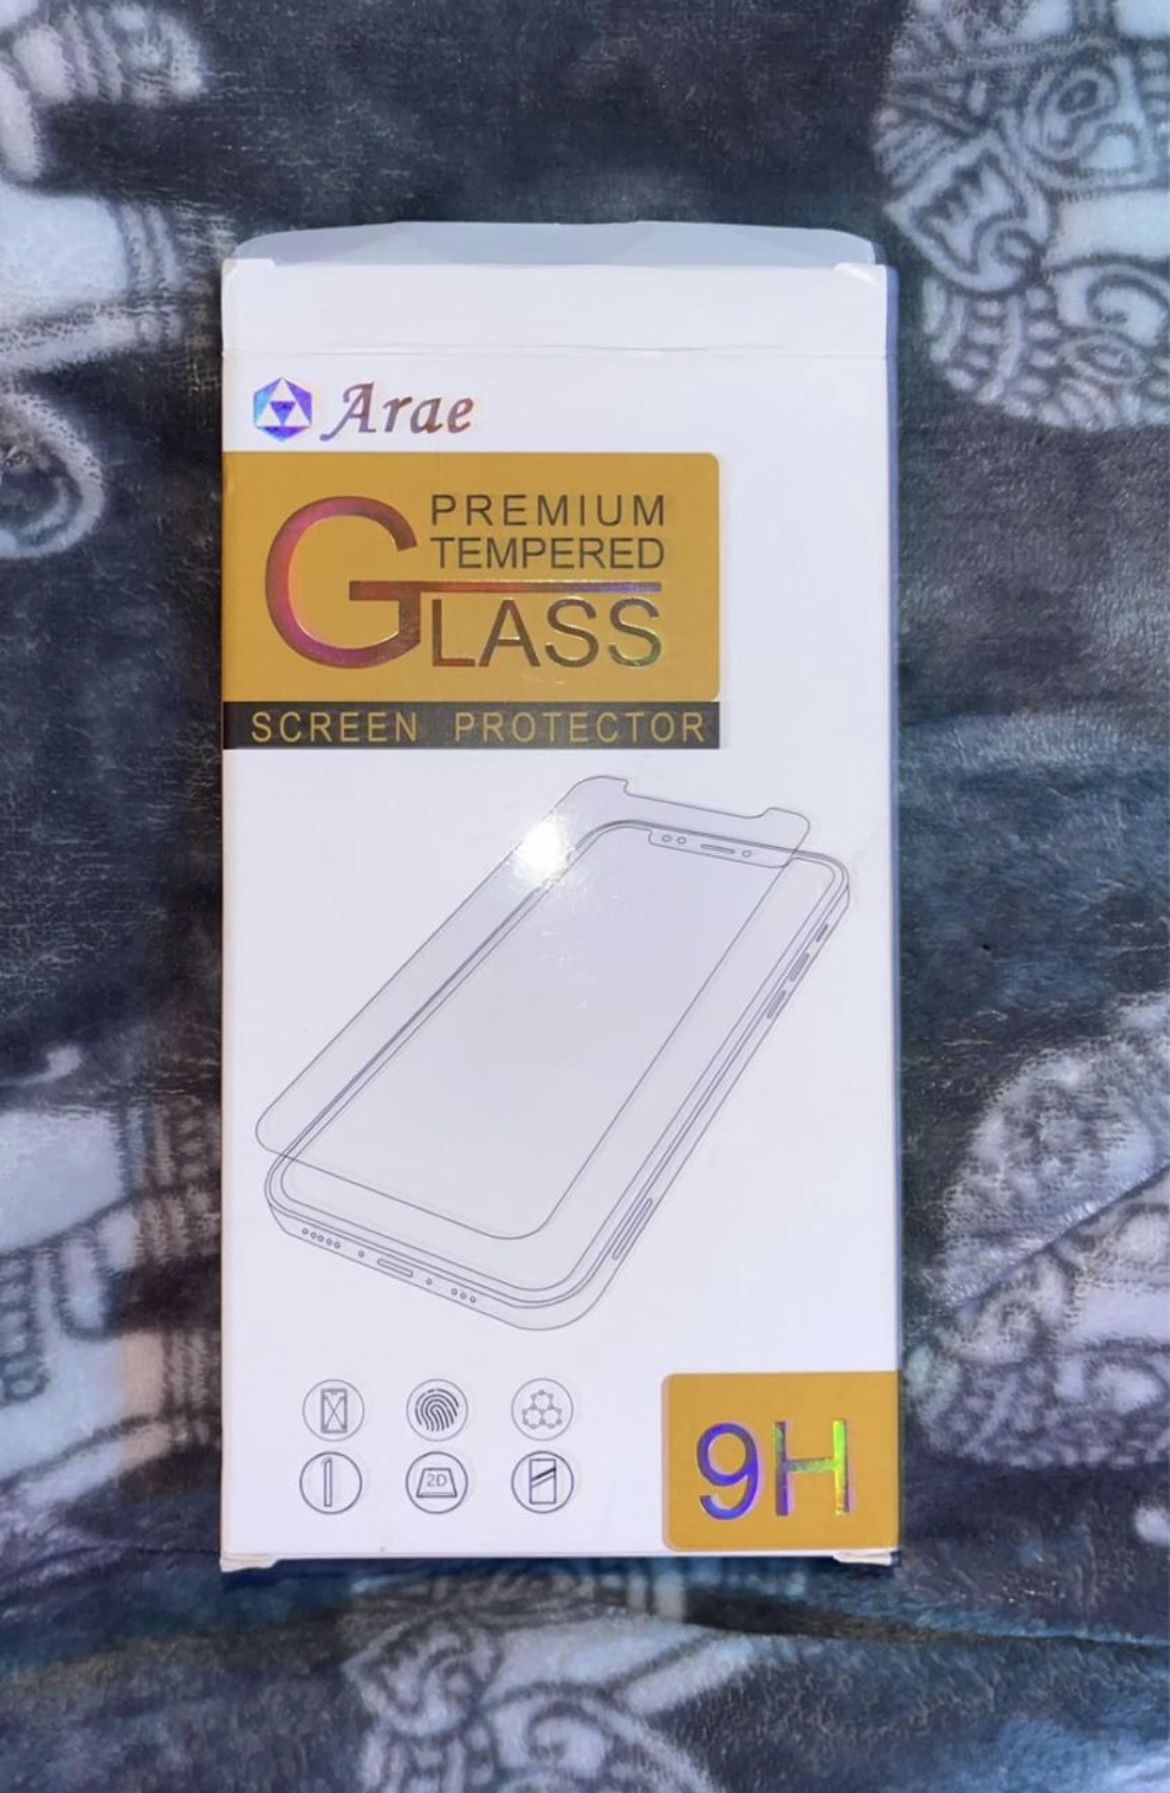 Two Glass Screen Protectors for iPhone 6/6s/7/8